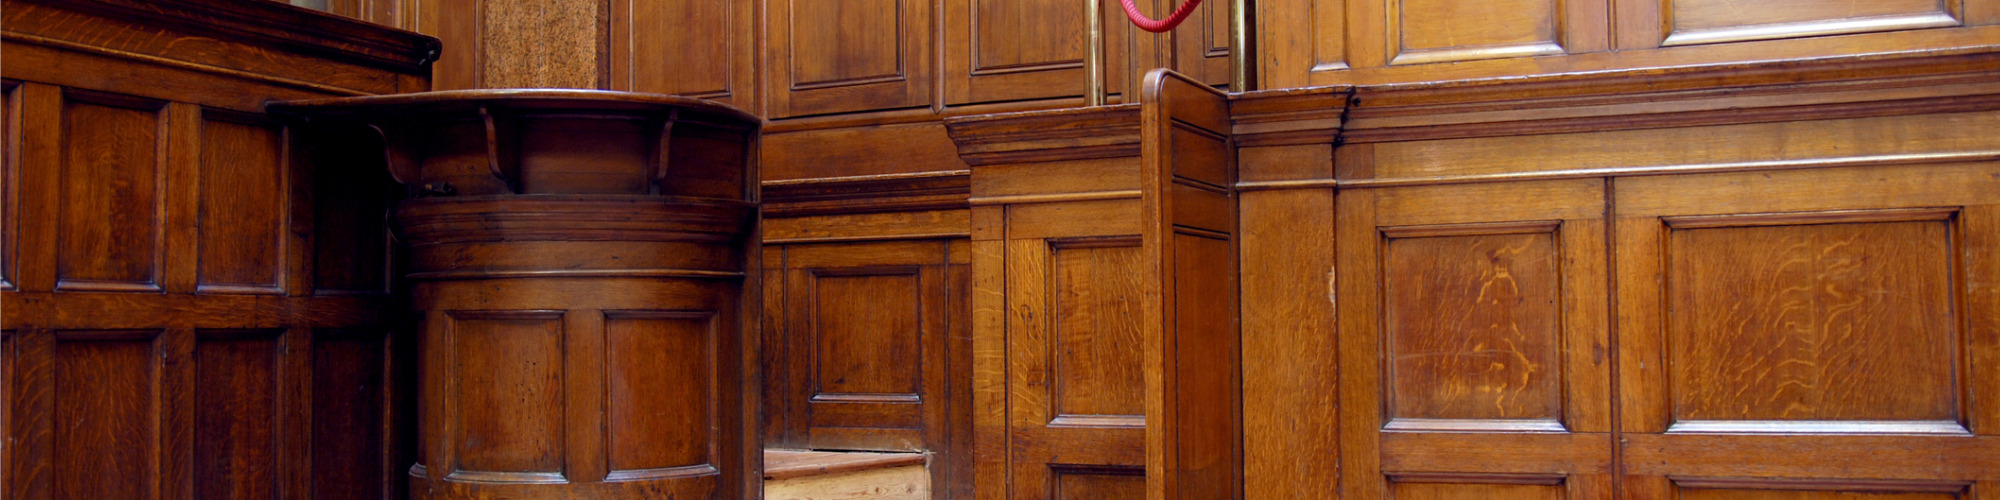 Giving Evidence in Court - A Guide for Expert Witnesses